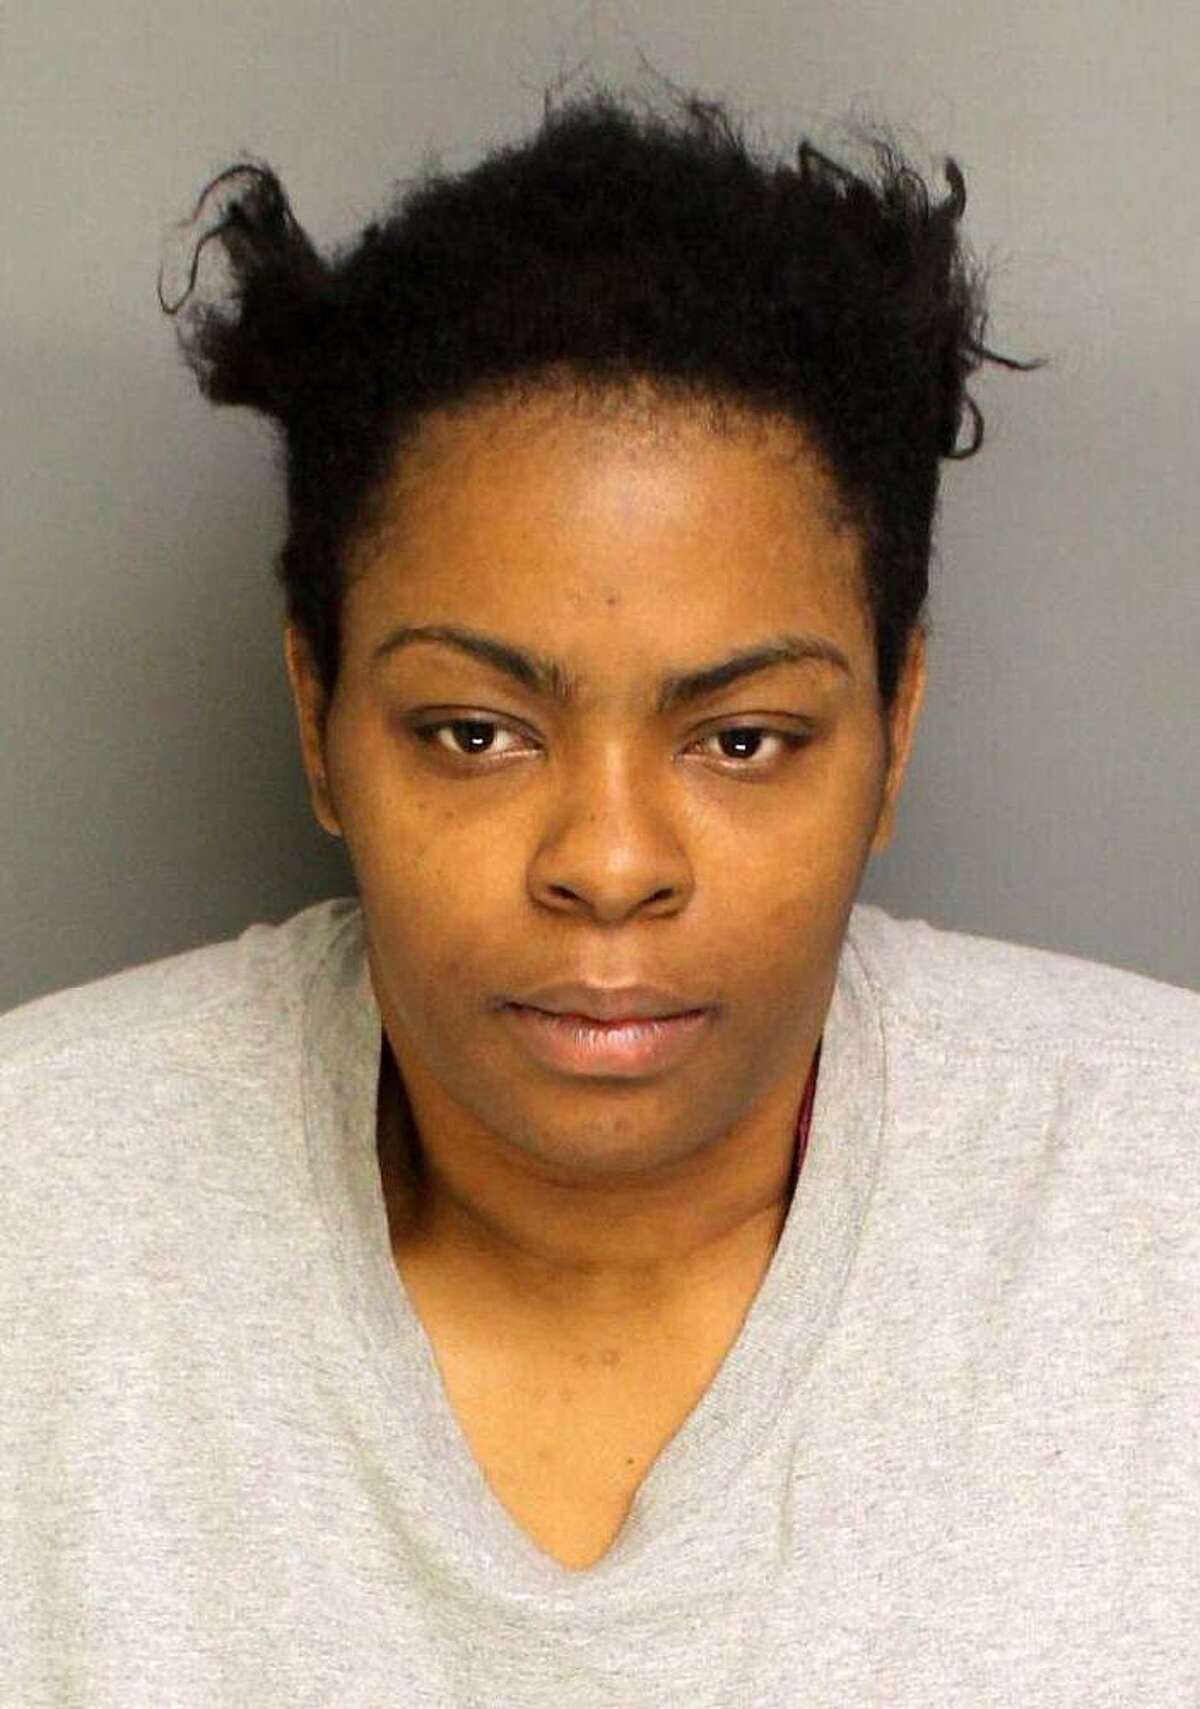 Tynisha Hall, 35, was arrested Thursday, March 23, 2017 on charges of murder, tampering with evidence and resisting arrest, according to Capt. Brian Fitzgerald of the Bridgeport Police Department.